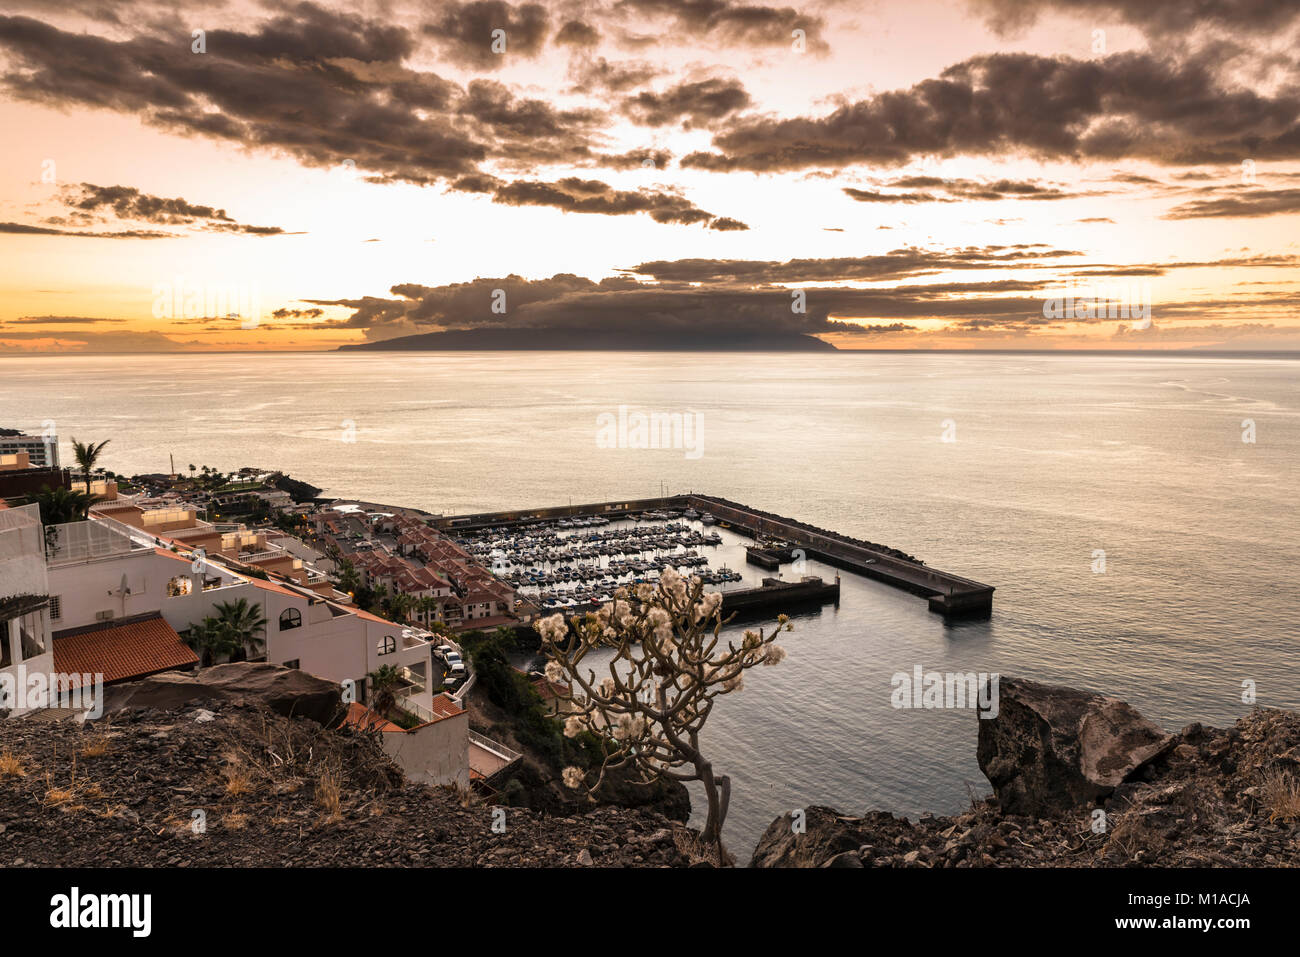 View westwards at sunset over the harbour of Los Gigantes, Tenerife, Canary Islands towards the island of La Gomera  with spectacular sky and calm sea Stock Photo